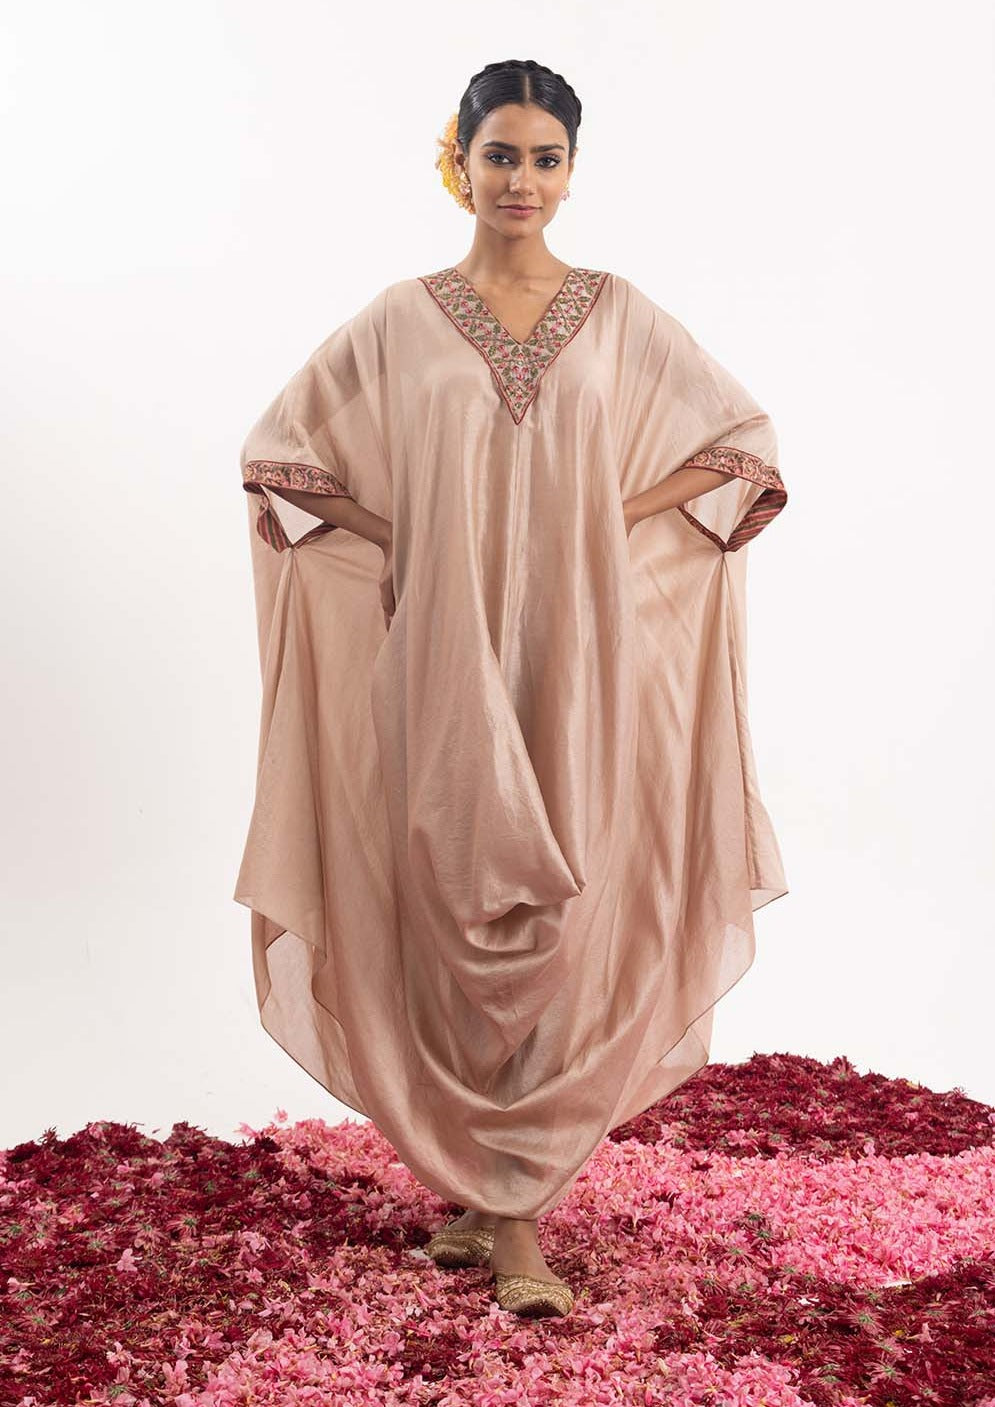 Kaftan in peach cotton silk, adorned with intricately embroidered neckline.